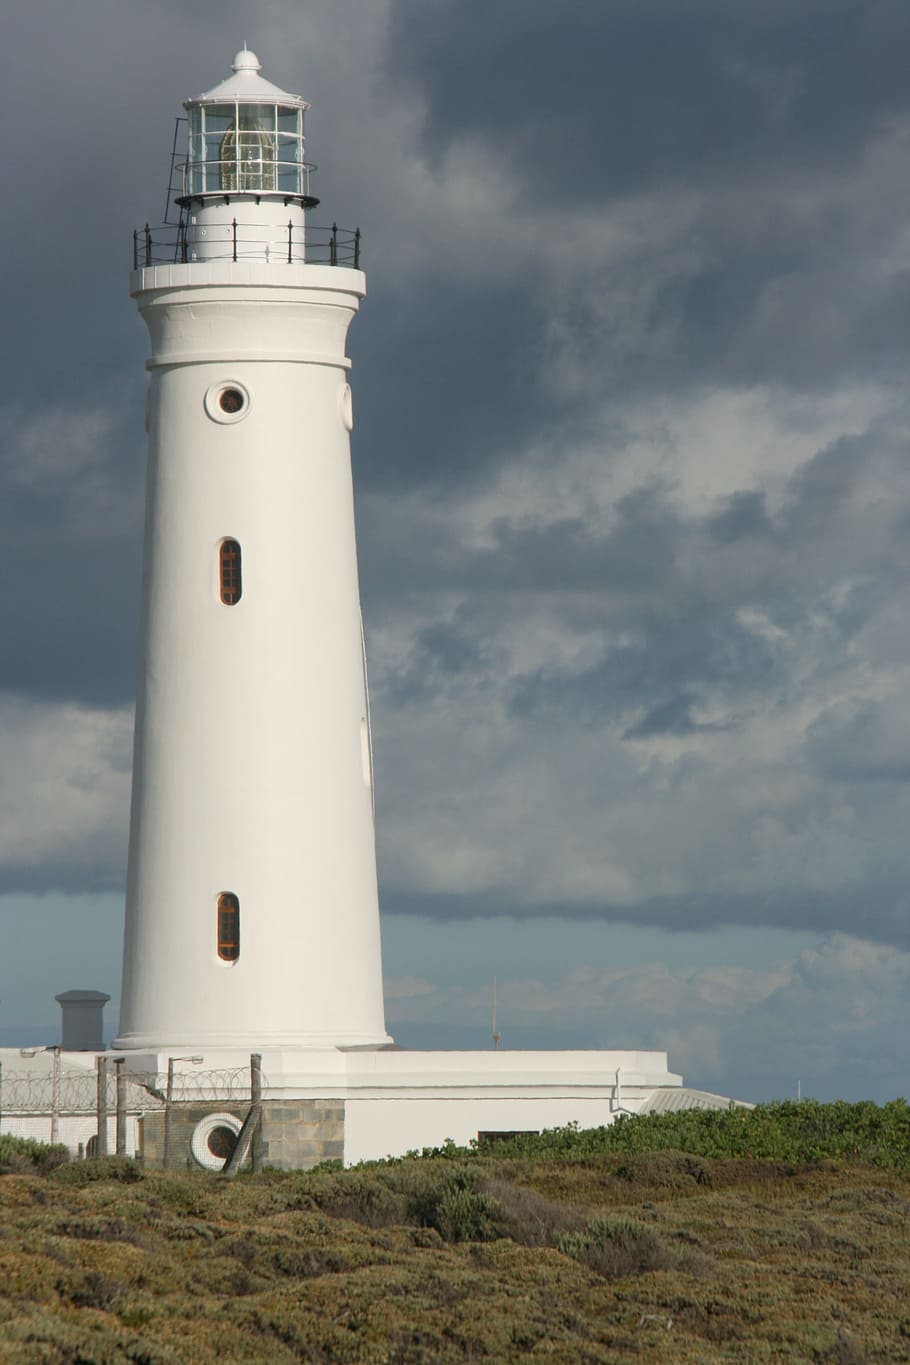 Sky, Lighthouse, Coast, Cape St Francis, guidance, cloud - sky, direction, safety, tower, protection